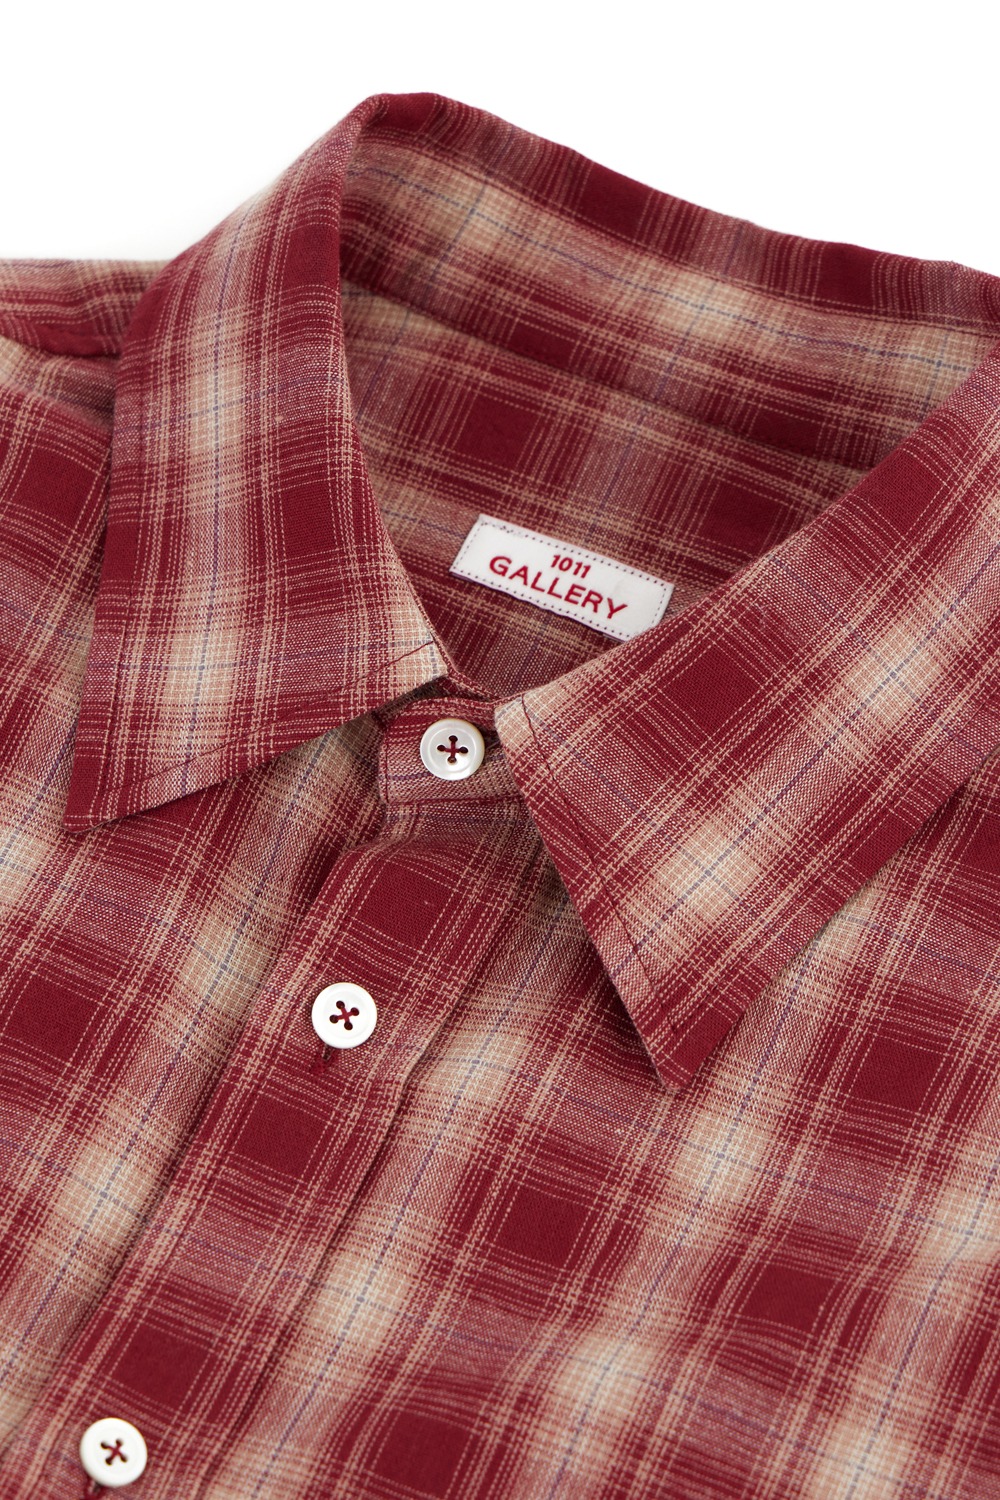 Gallery Graphic Check Pattern Shirt - Red